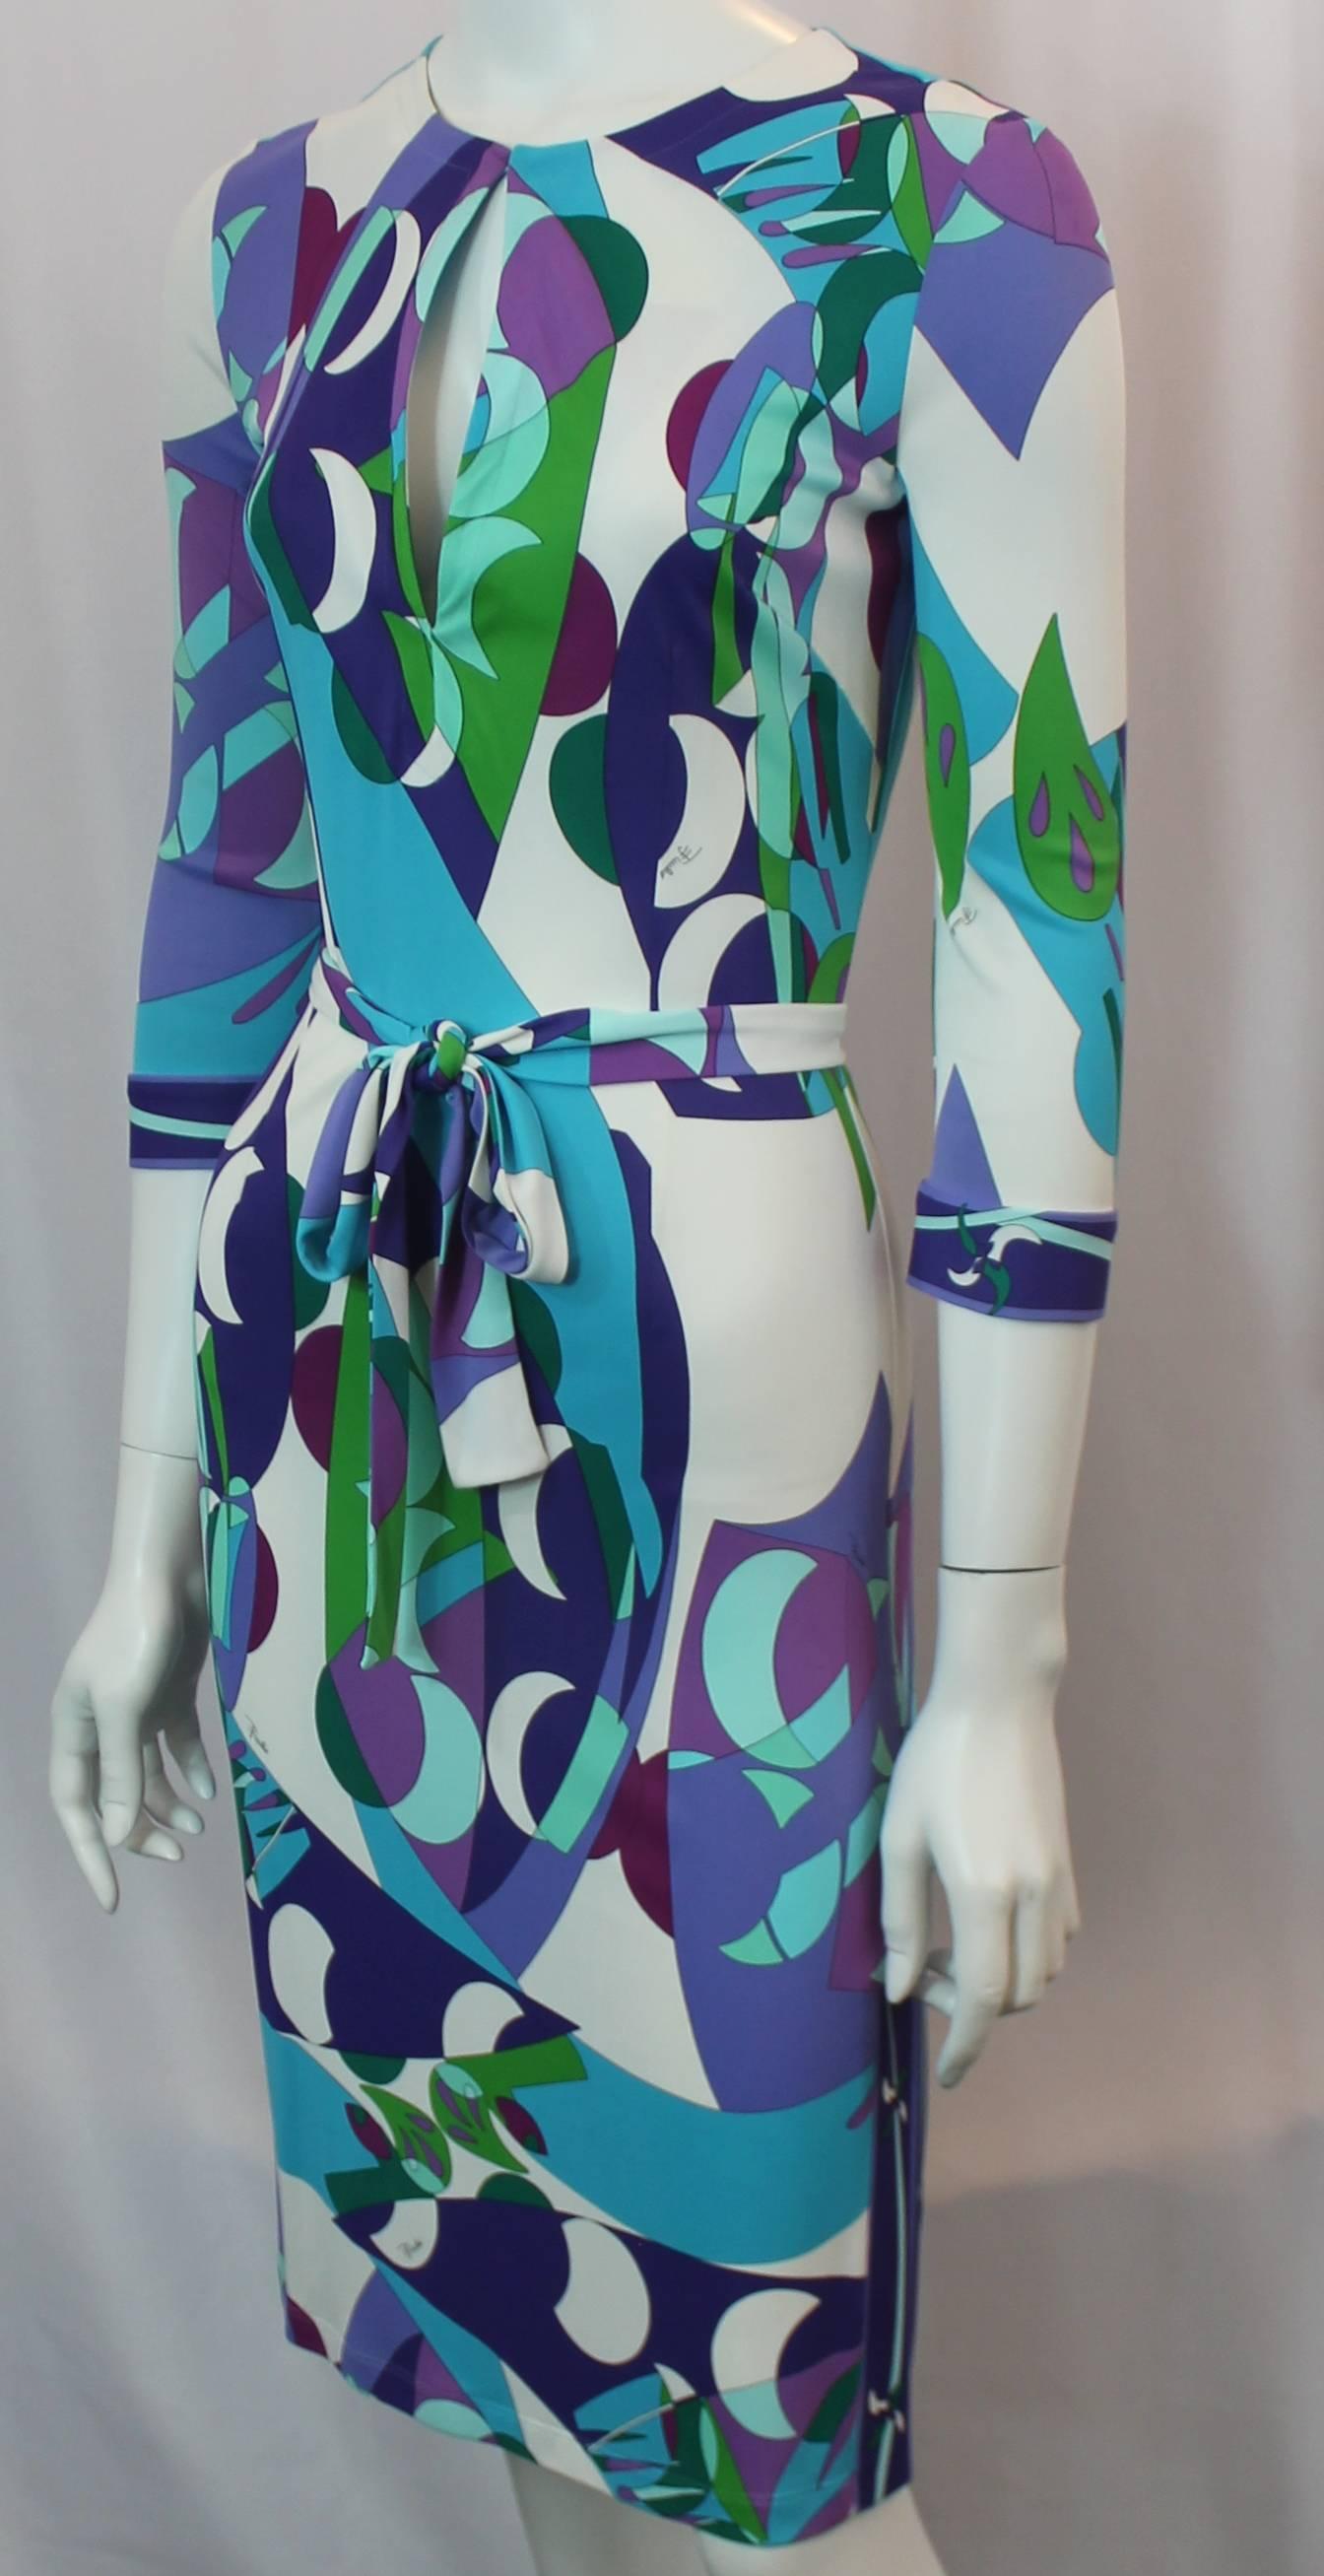 Emilio Pucci Multi-Colored Geometric Print Jersey 3/4 Sleeve Dress - 6.This 3/4 dress is white with a geometric-shape pattern in green, purple, and blue. It has a keyhole cutout which can be worn unbuttoned to look like a collar and a belt is